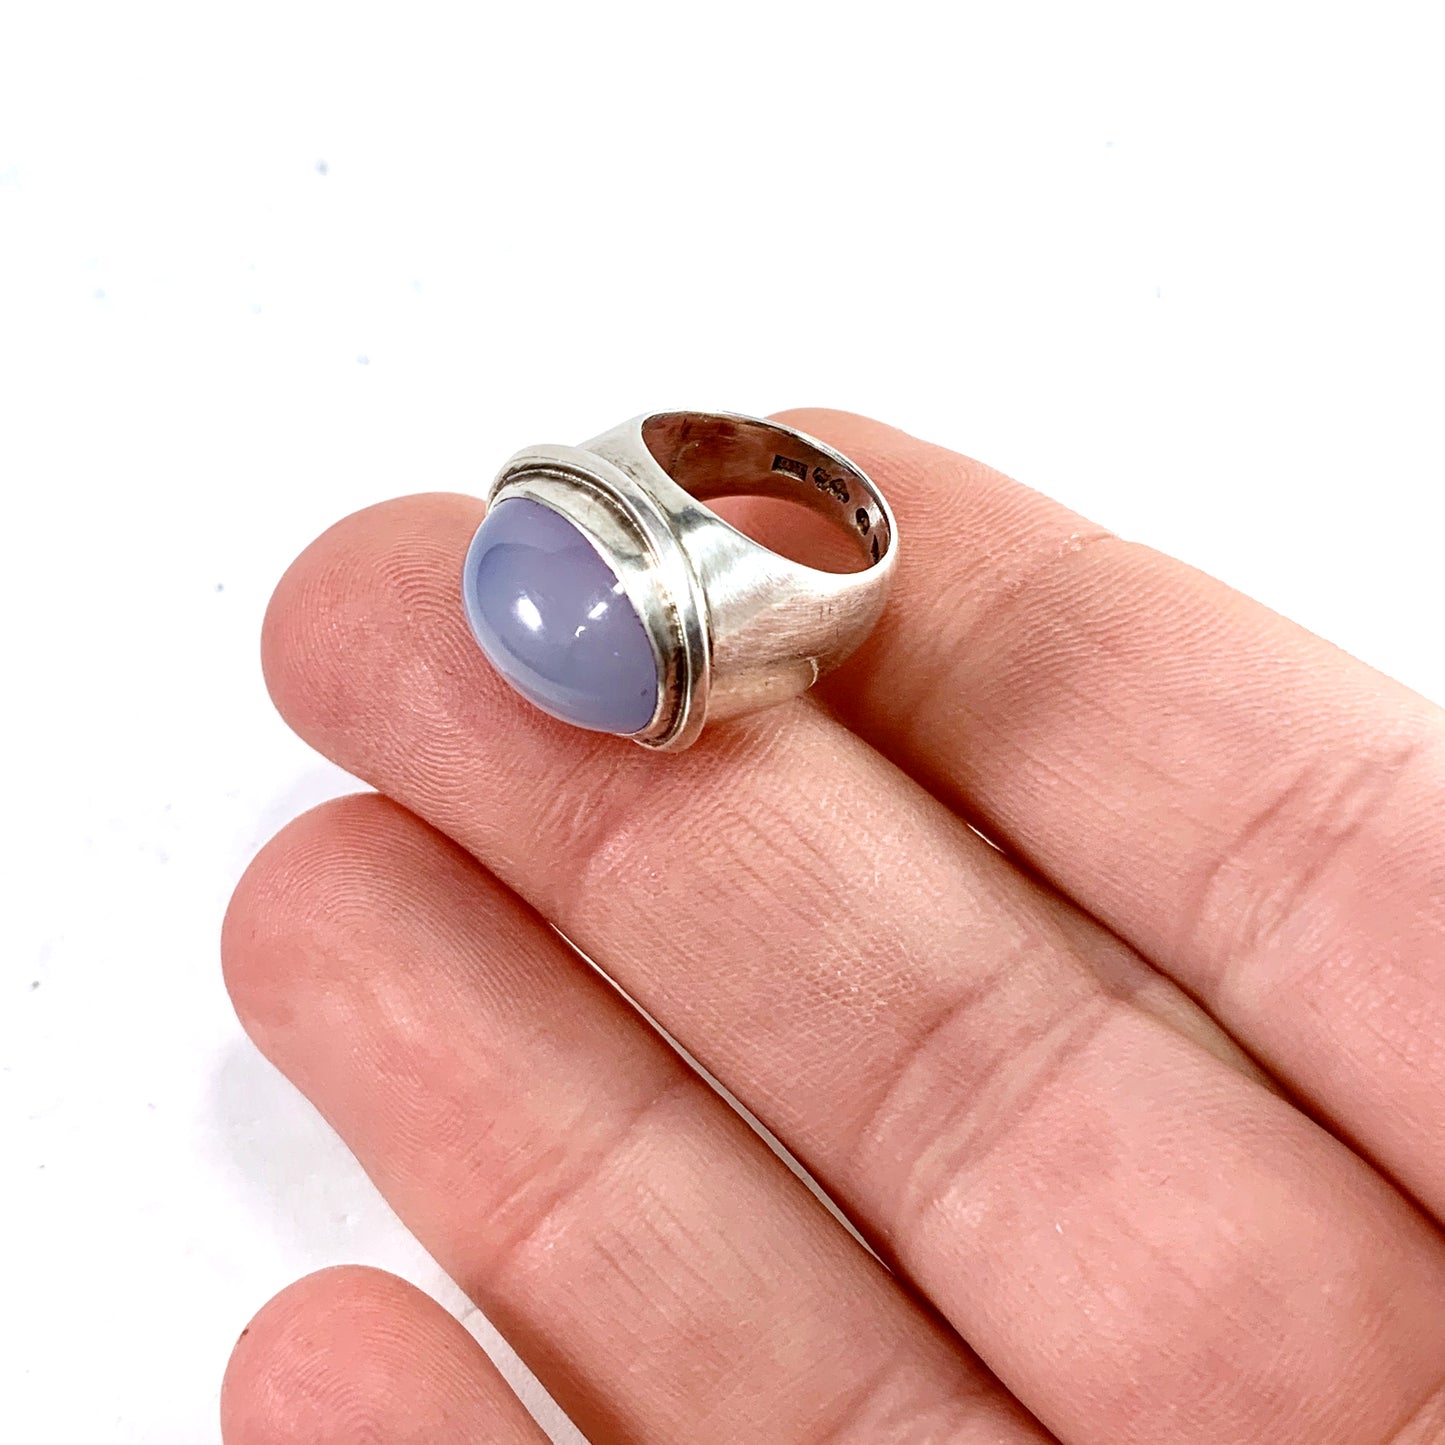 Rey Urban, Stockholm 1955 Mid Century Modern Sterling Silver Chalcedony Pinky Ring. Early.